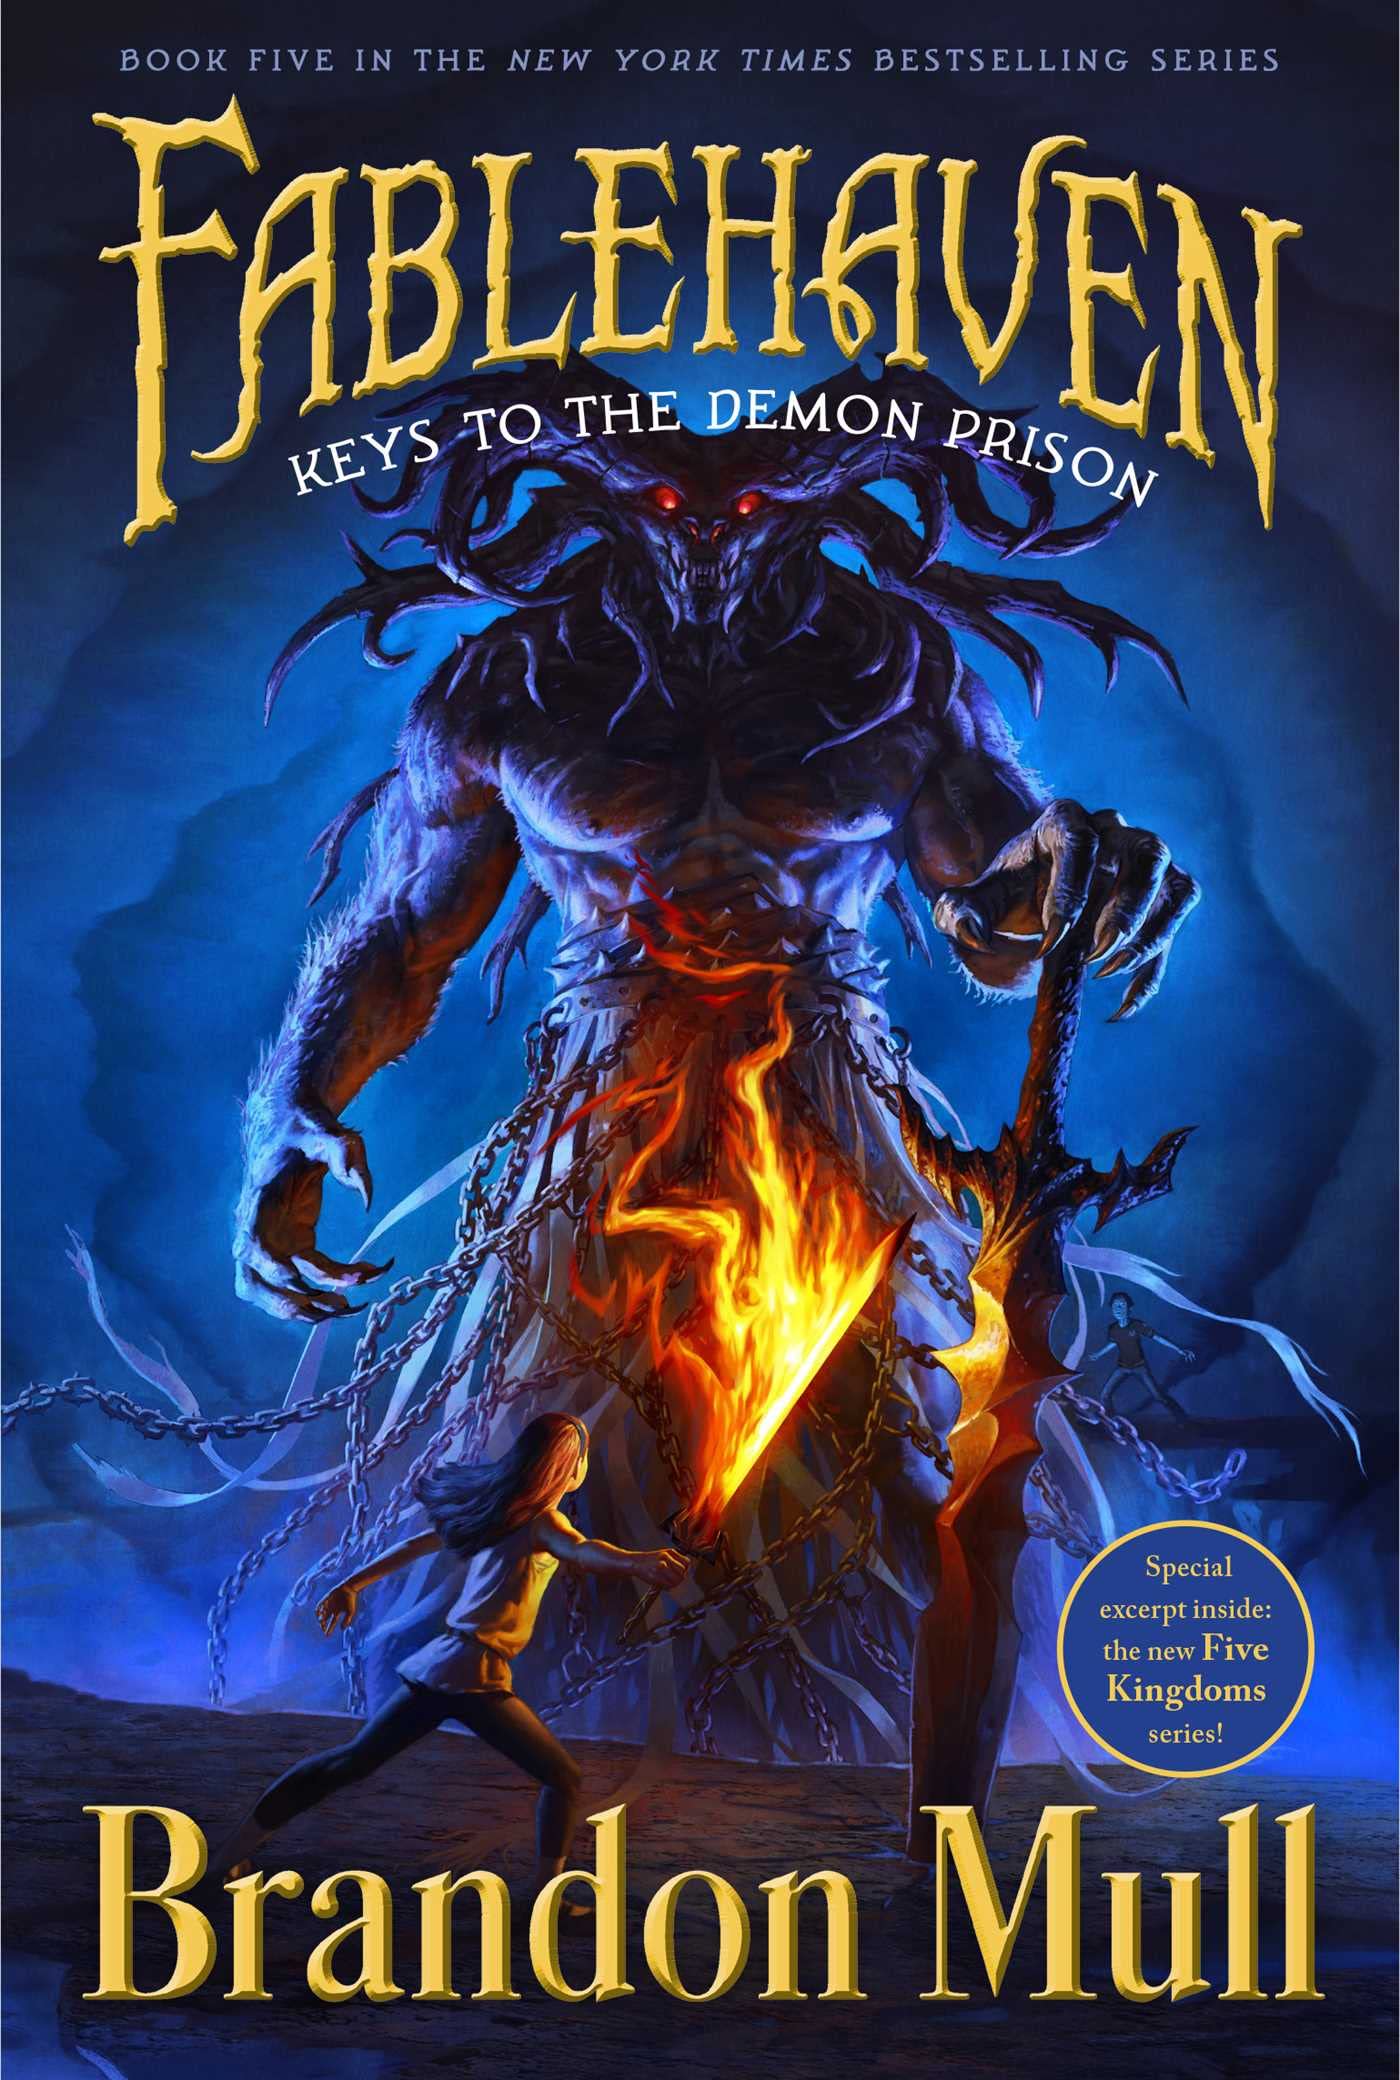 IMG : FableHaven Keys to the Demon Prison #5